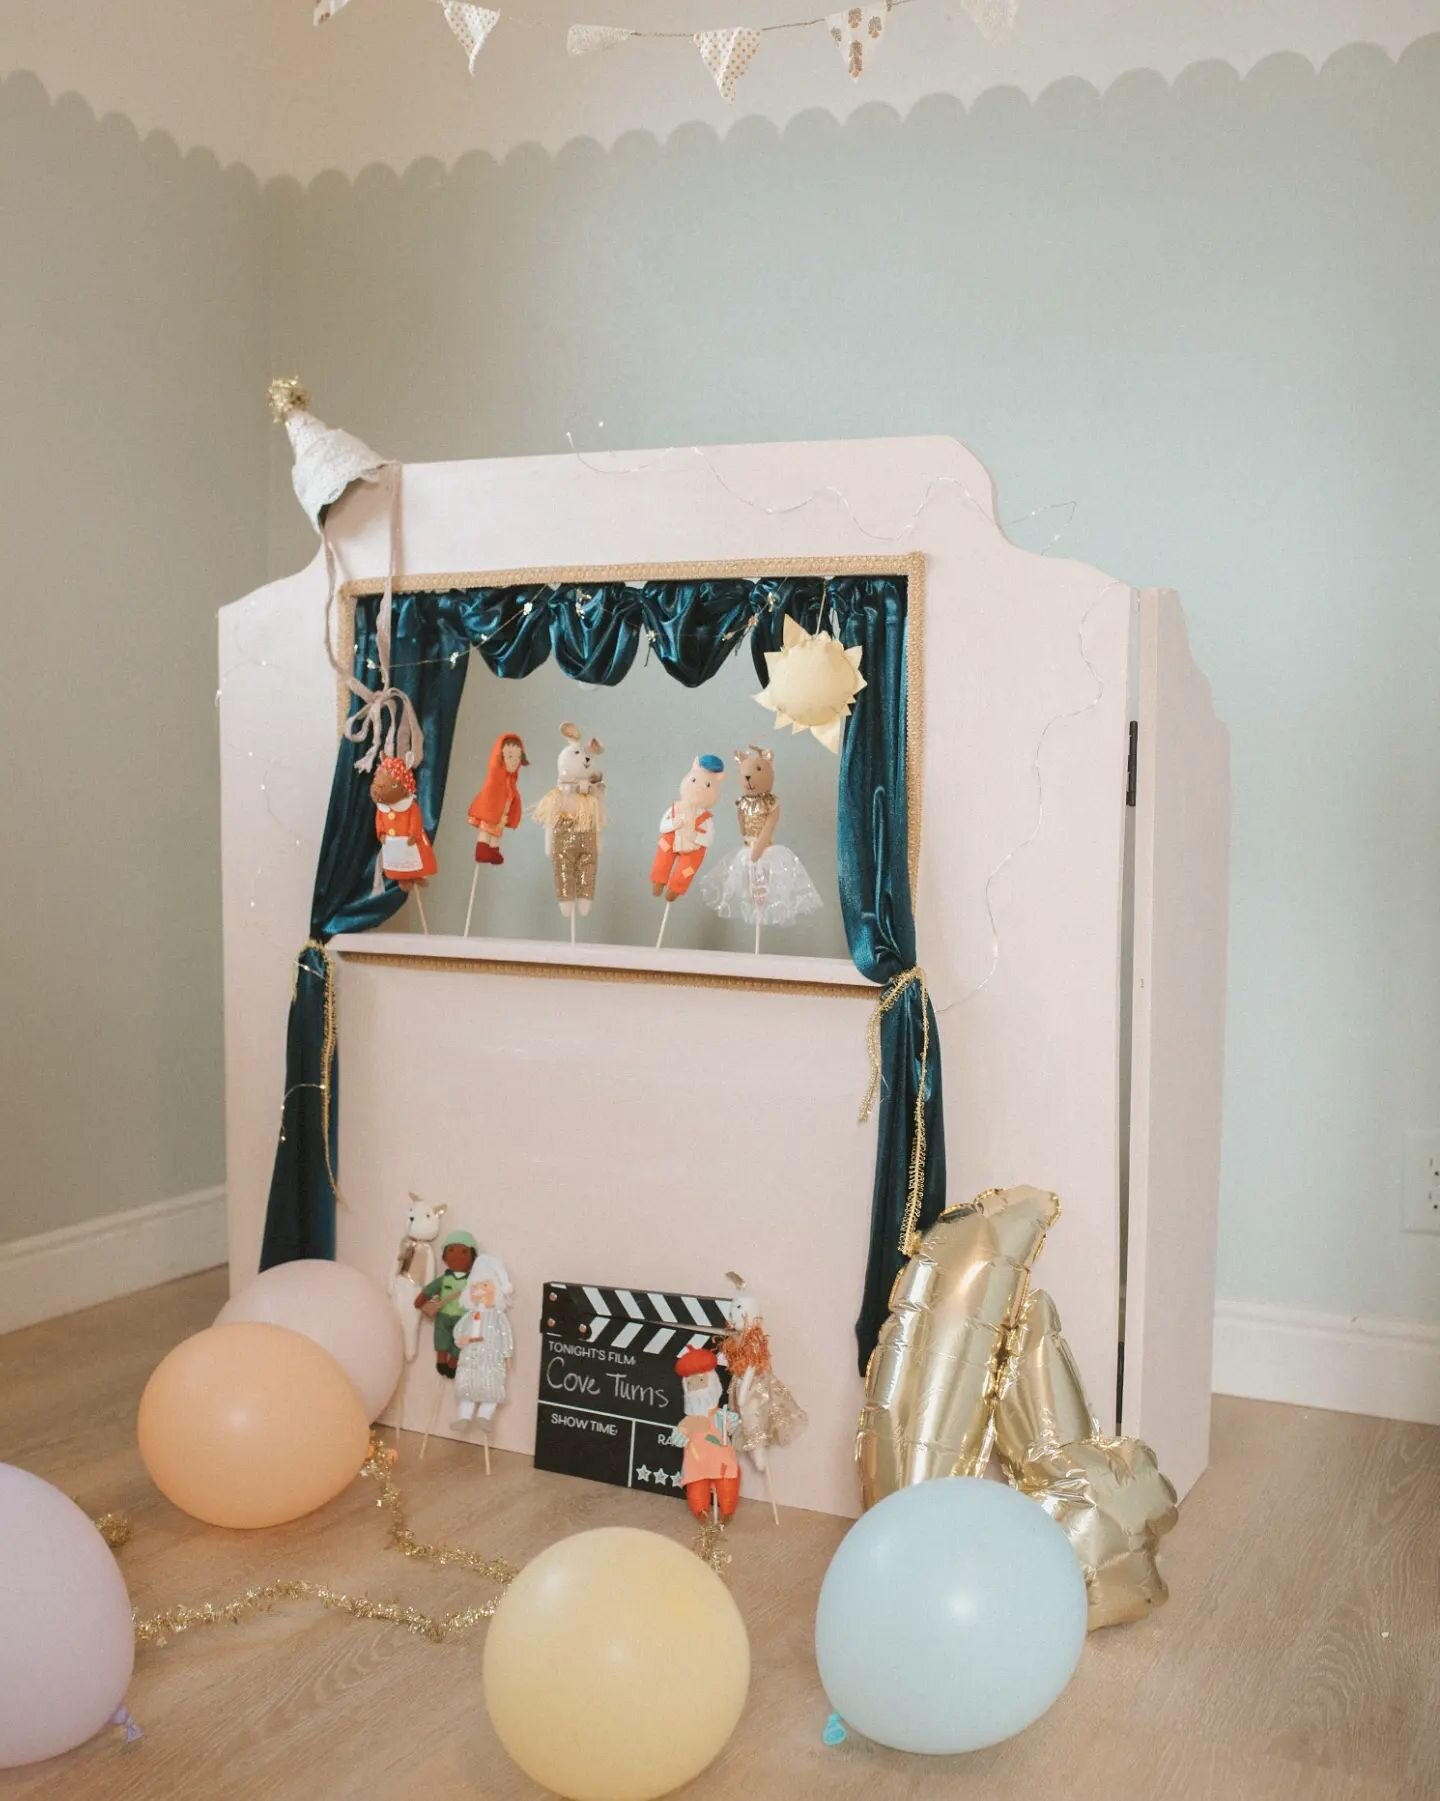 Cove is 4! ✨

I had a puppet theatre growing up that my mom made me so making this puppet theatre for Cove's birthday just felt right! She loves it and we'll have lots of fun making up stories ✨

🎭 I used the leftover plywood from our bunk beds to m